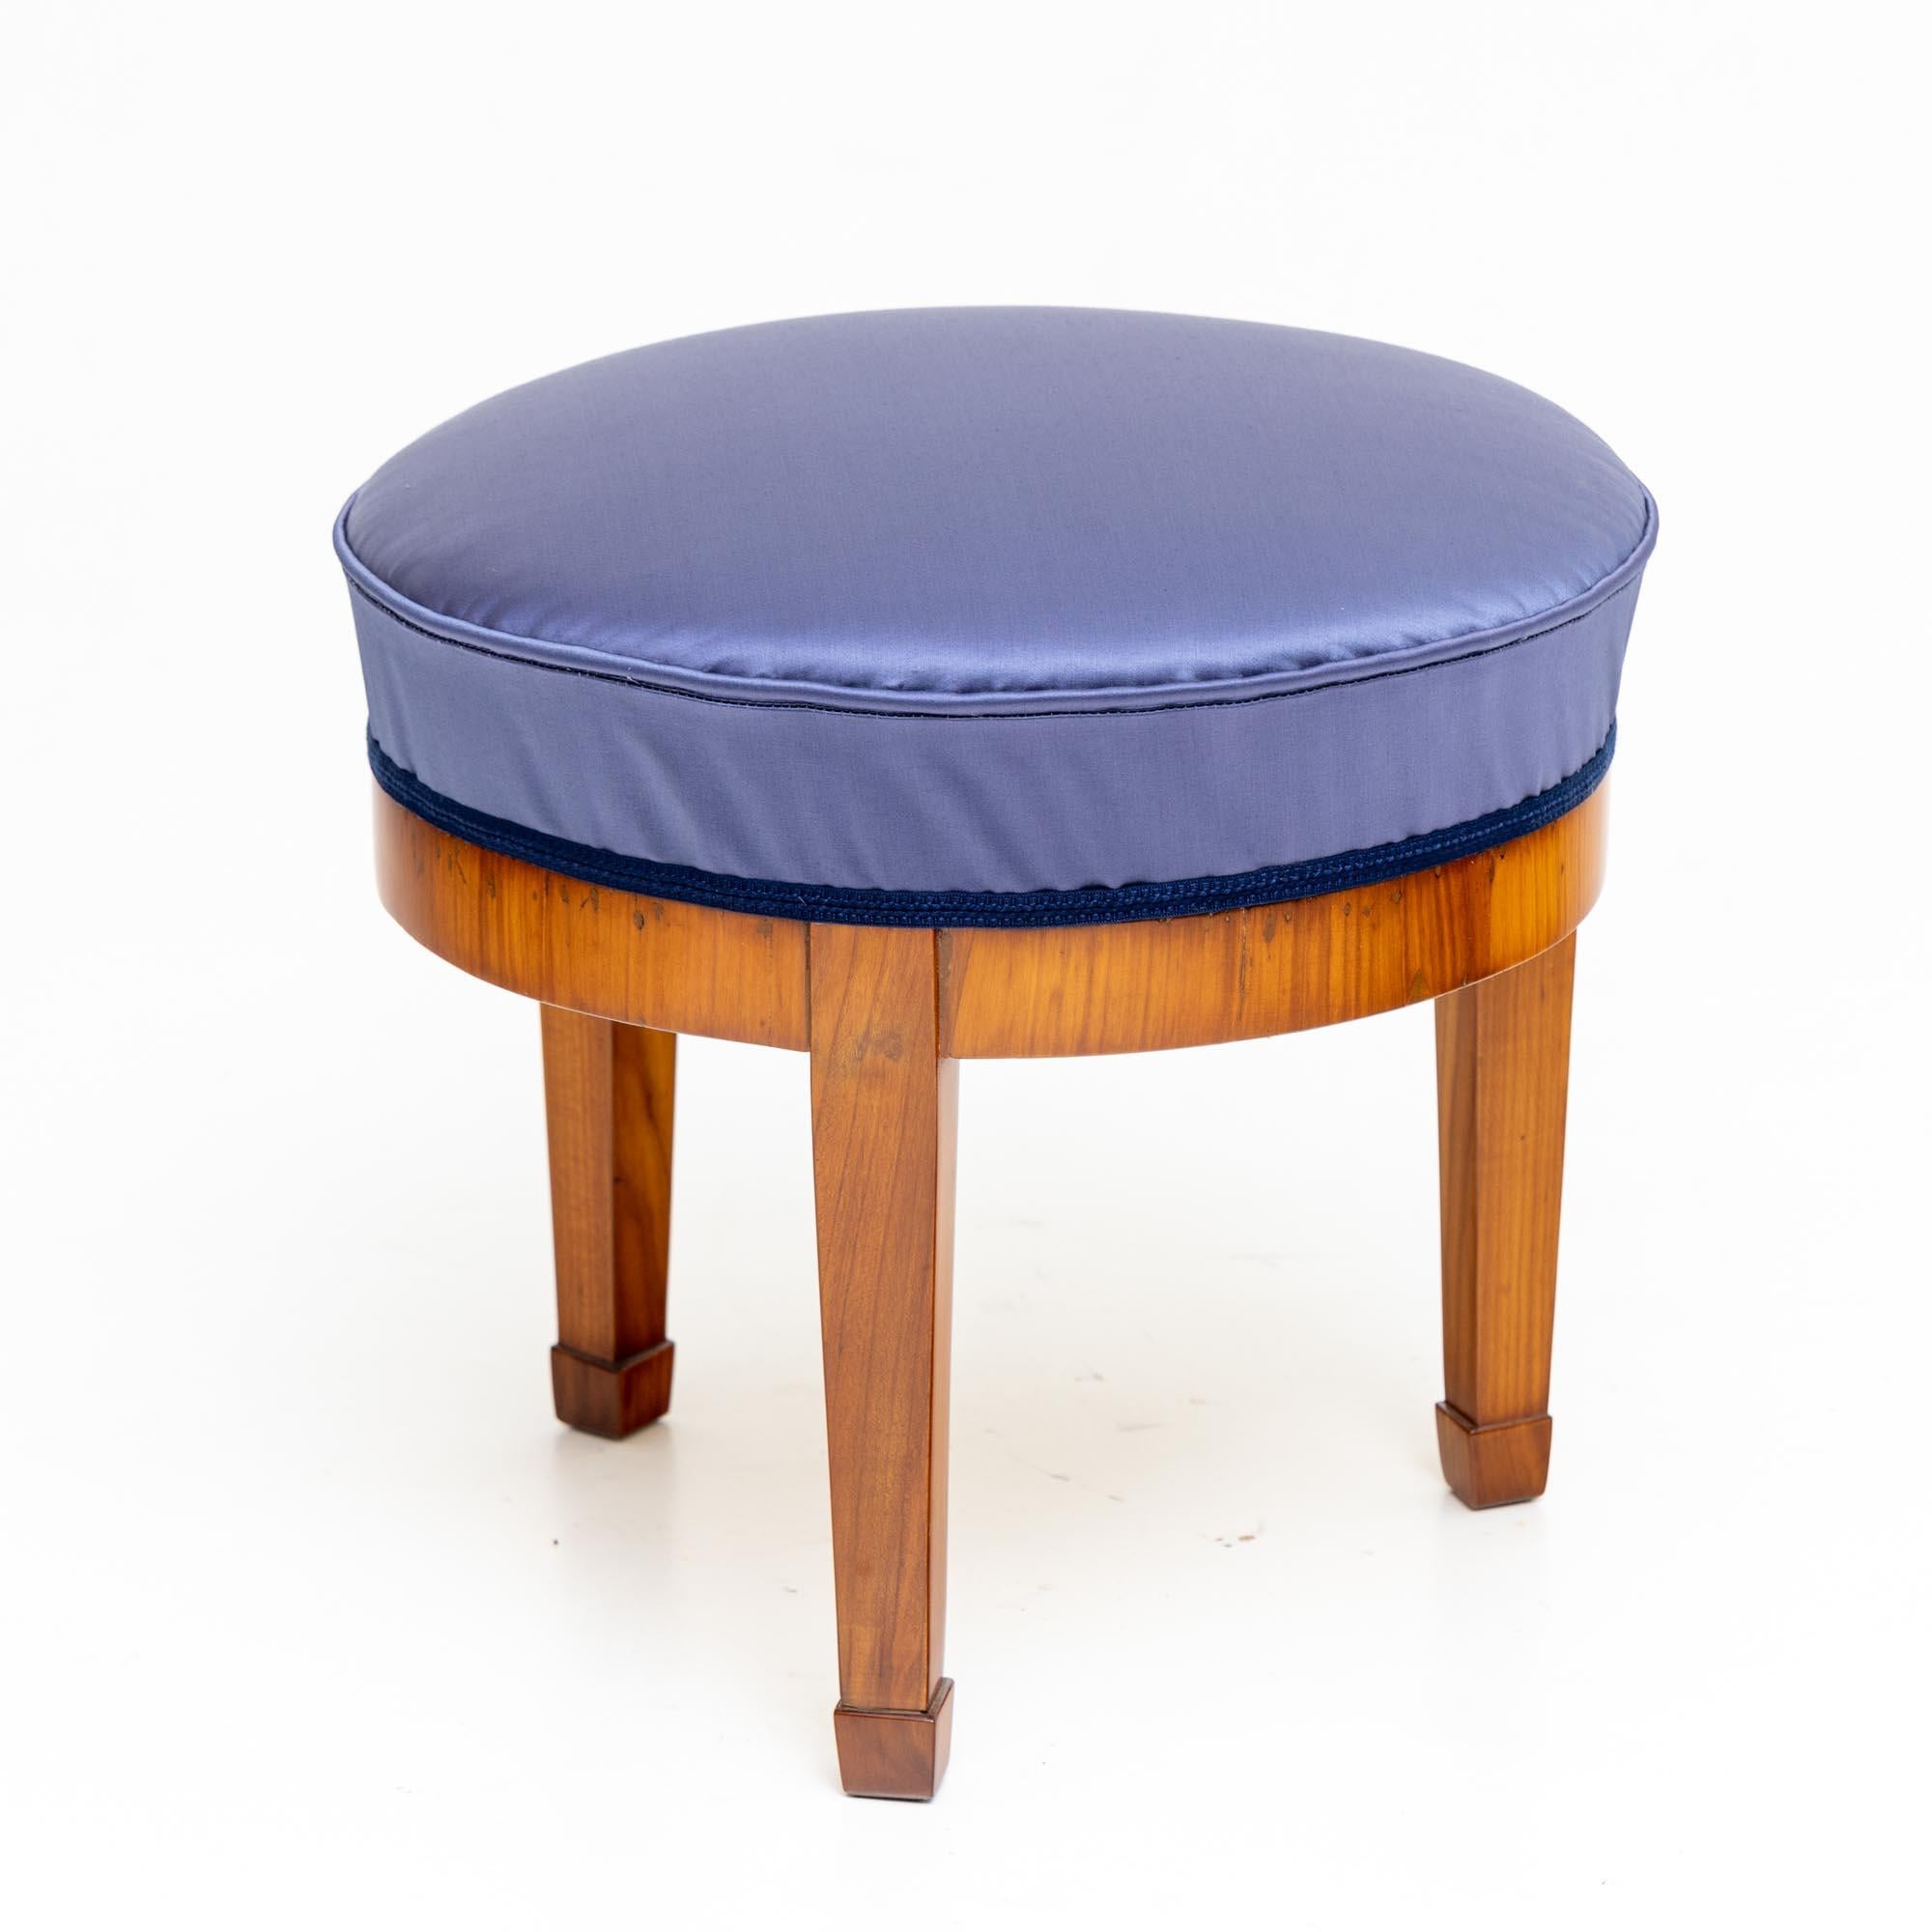 Biedermeier Stool with Satin Cover, c. 1820 In Good Condition For Sale In Greding, DE